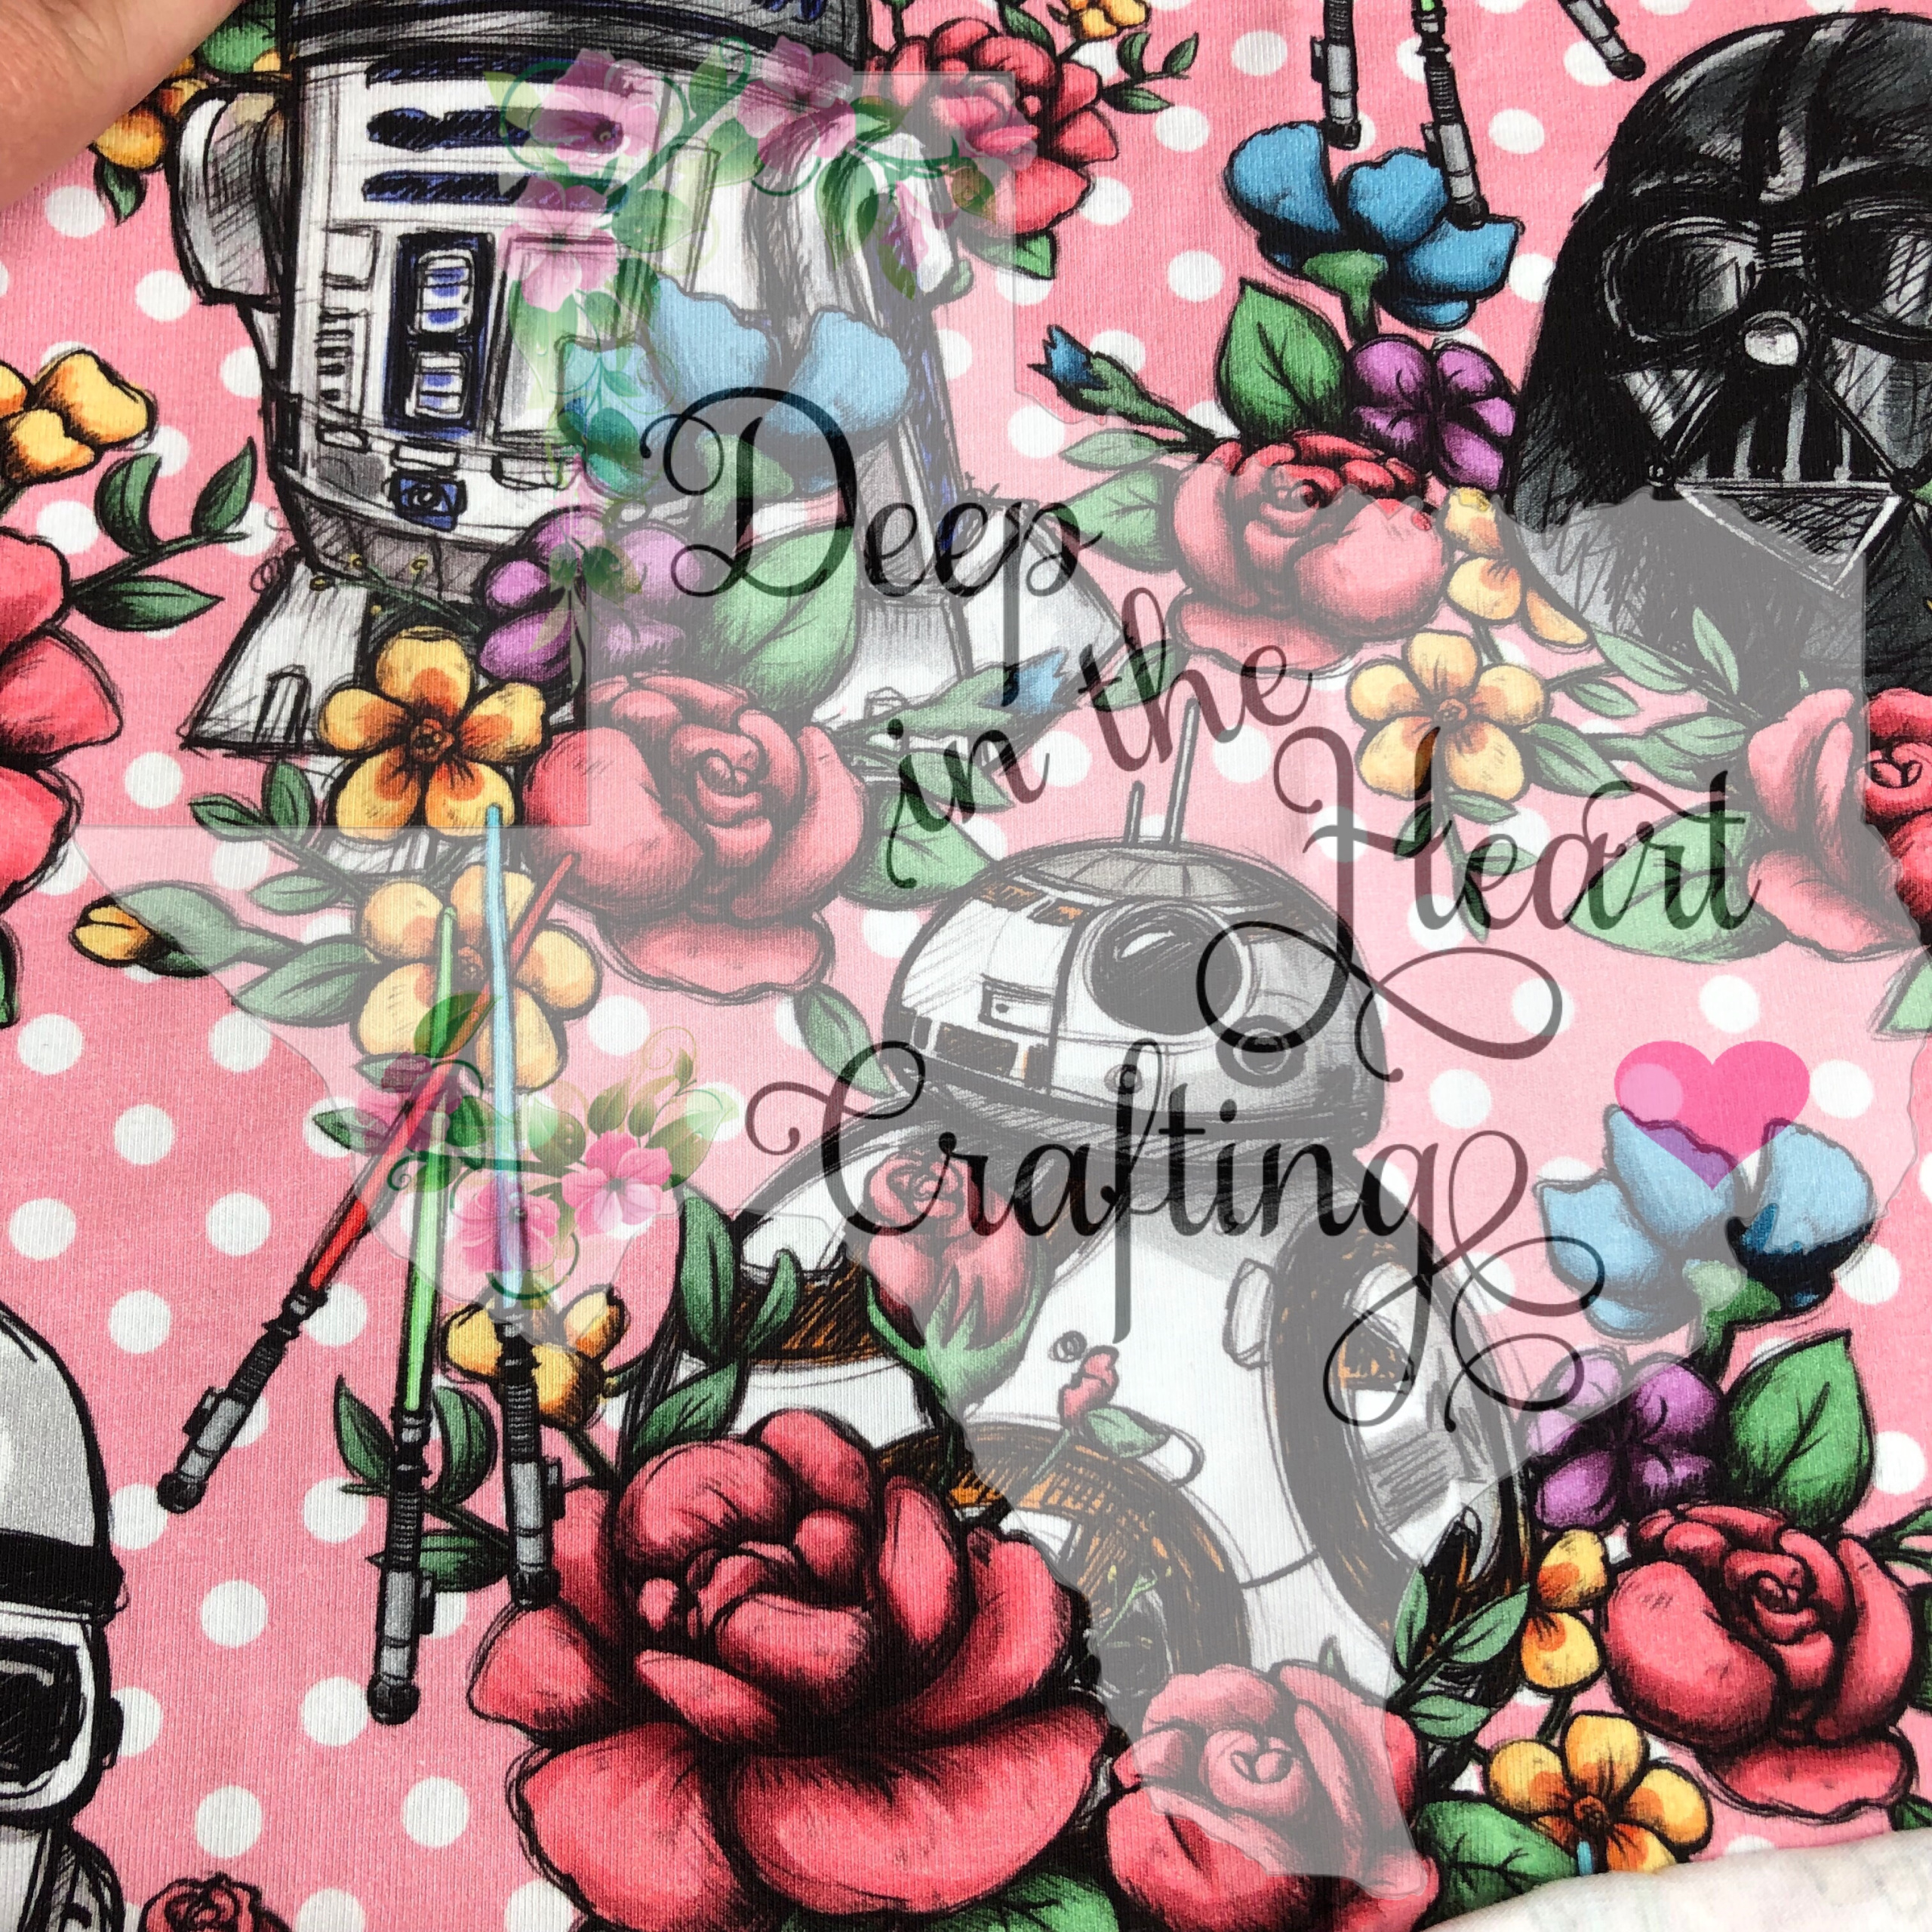 floral star wars fabric